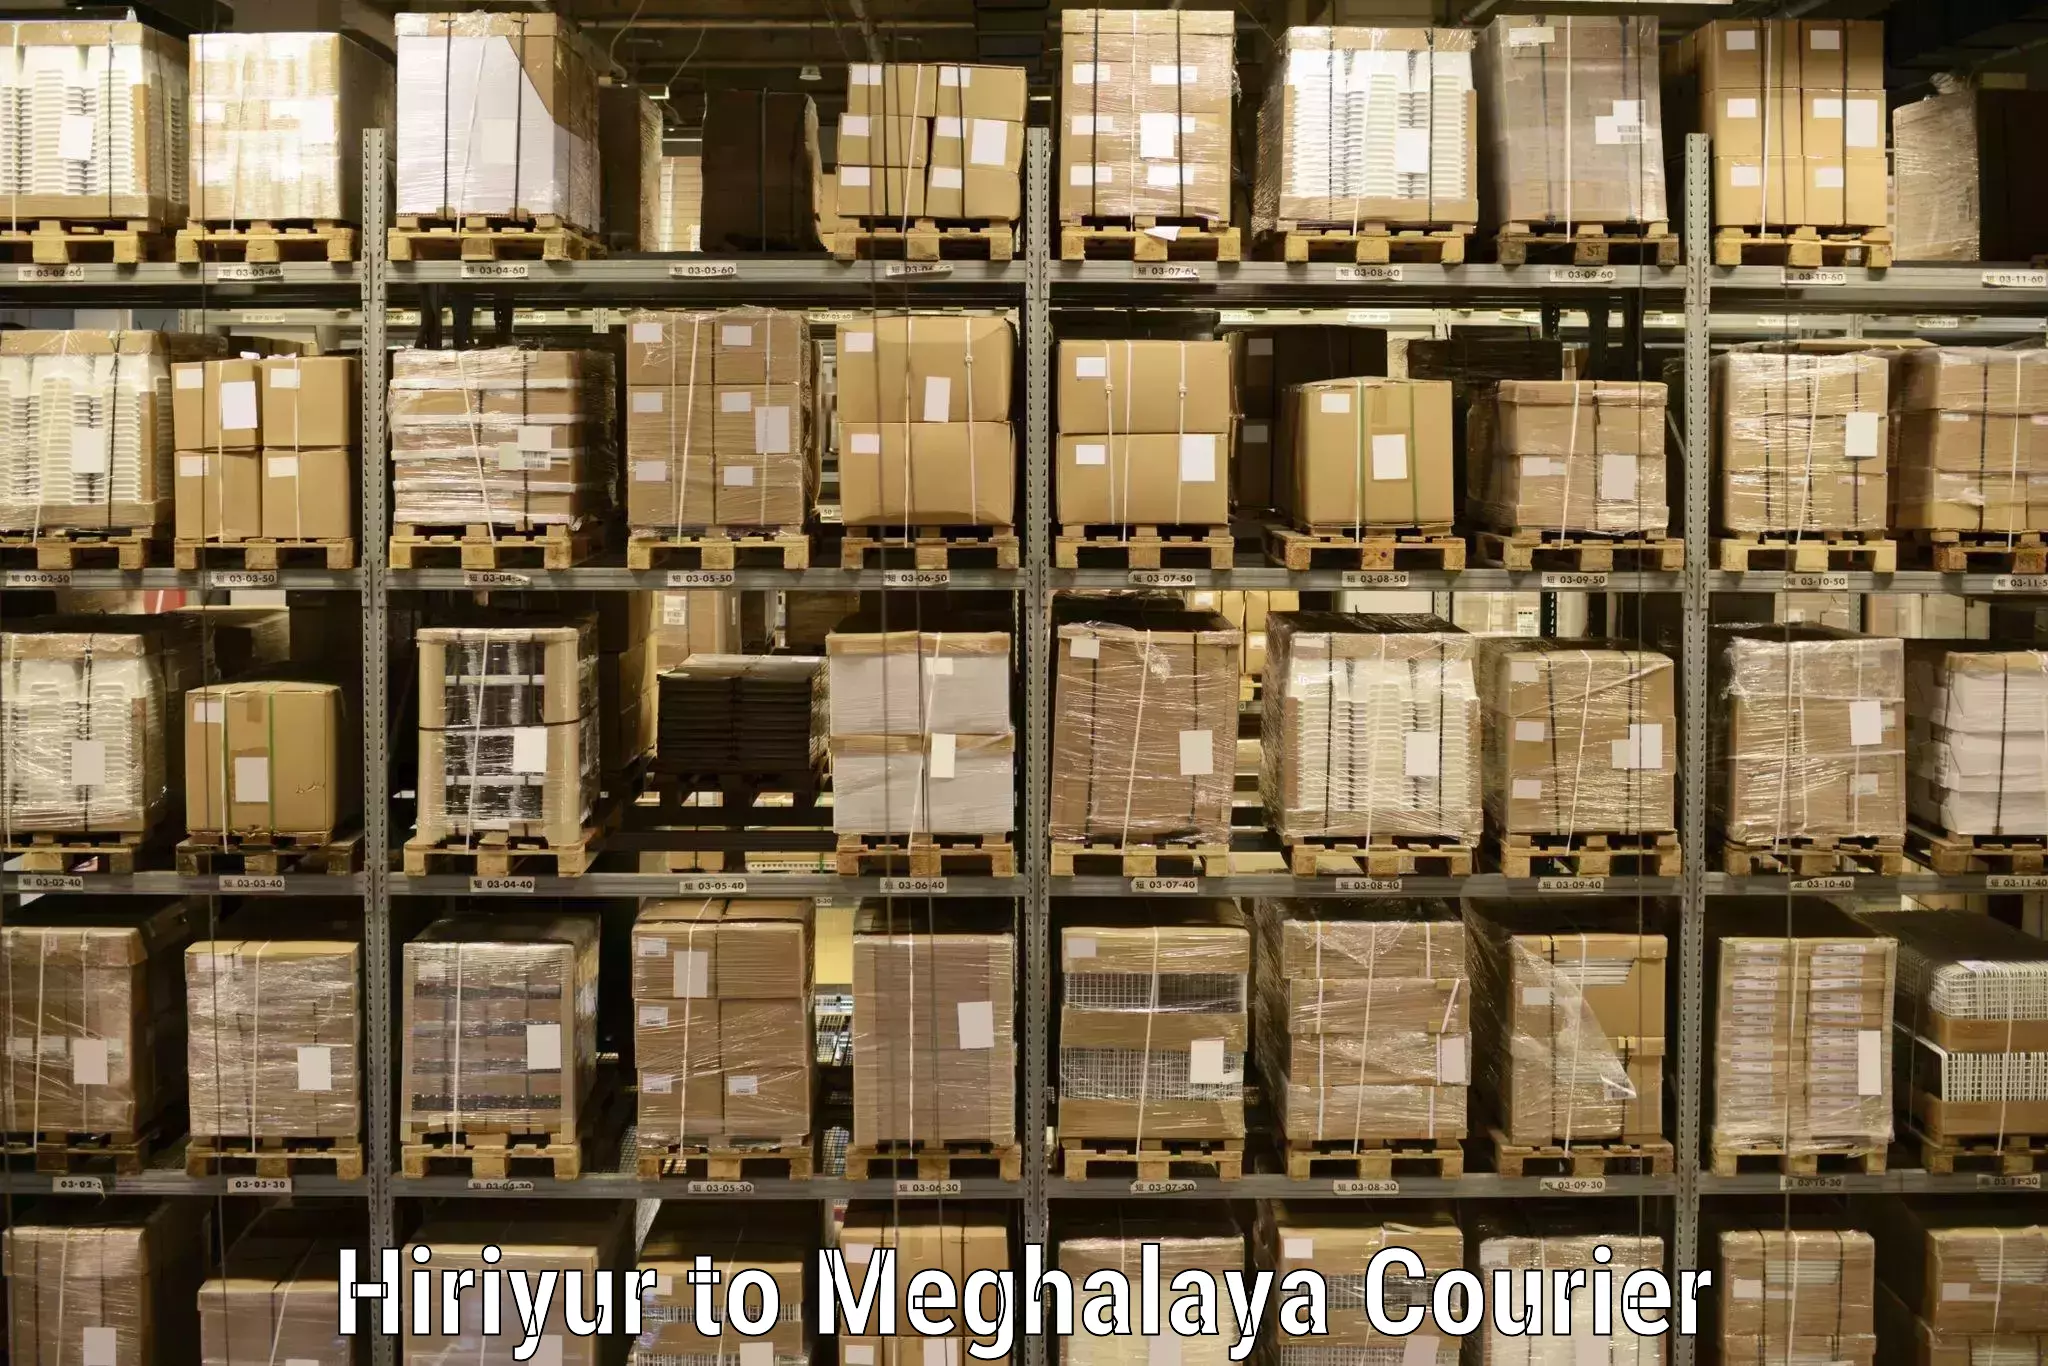 Next-generation courier services Hiriyur to Shillong